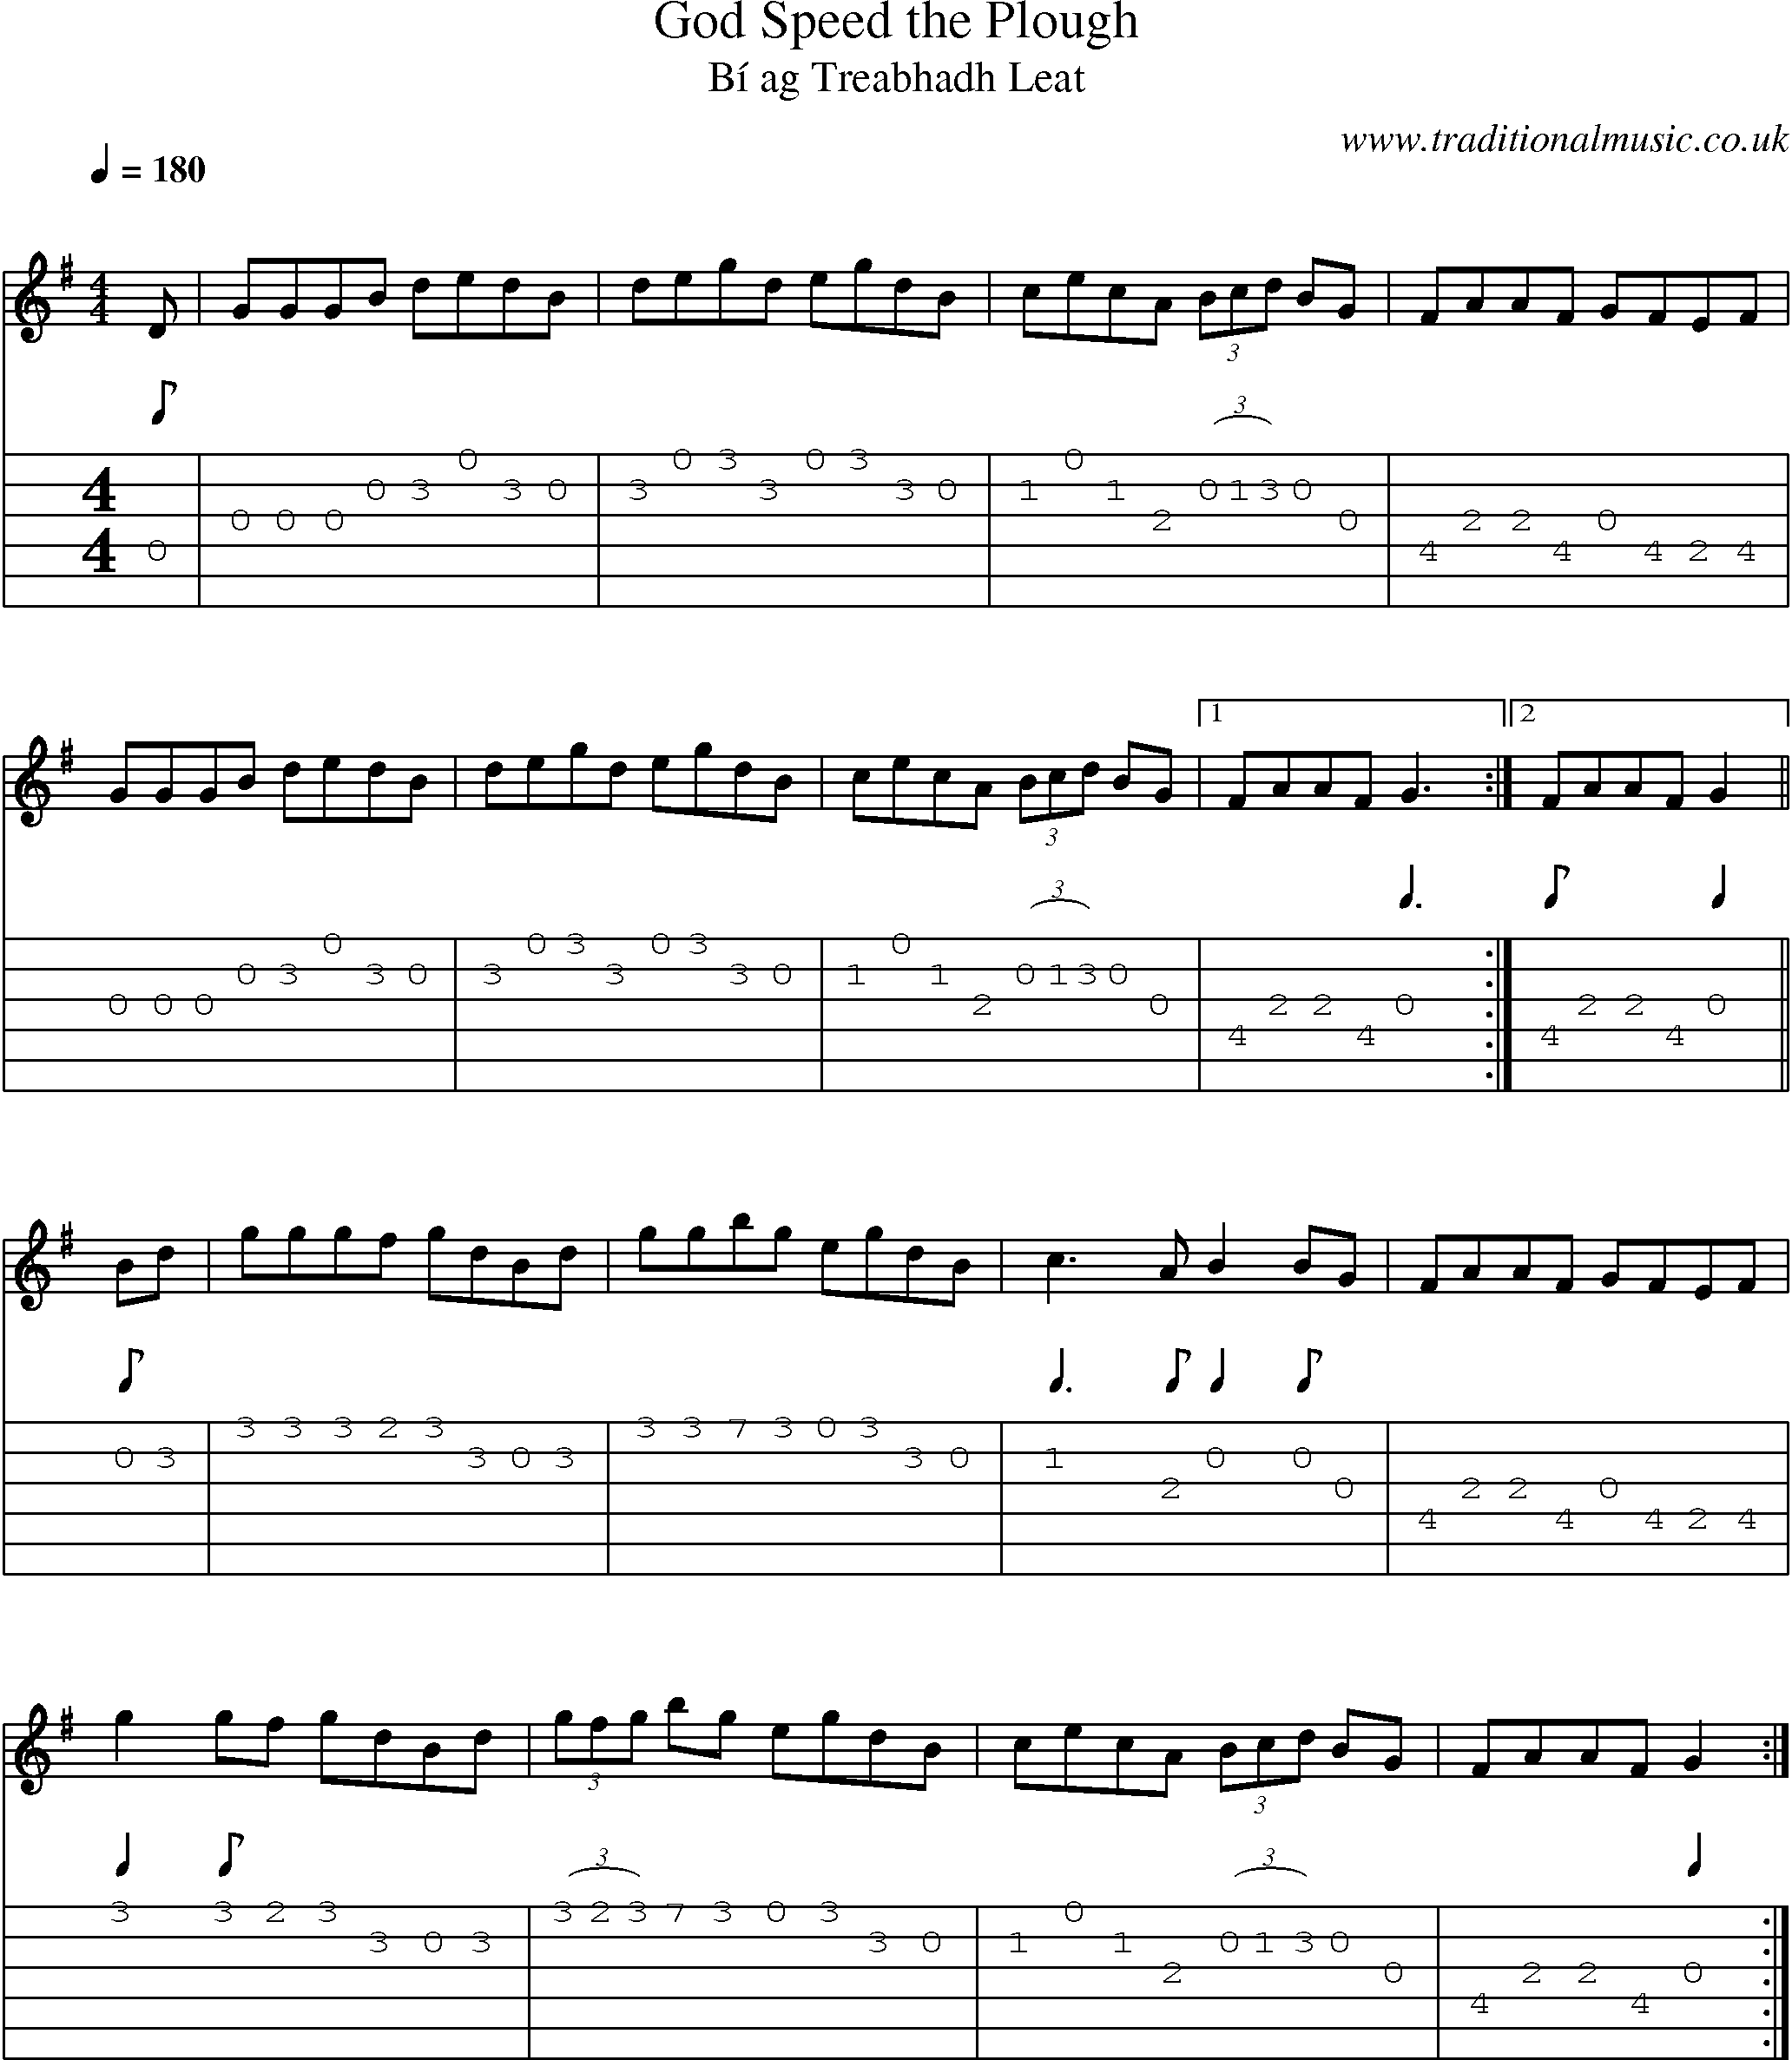 Music Score and Guitar Tabs for God Speed Plough